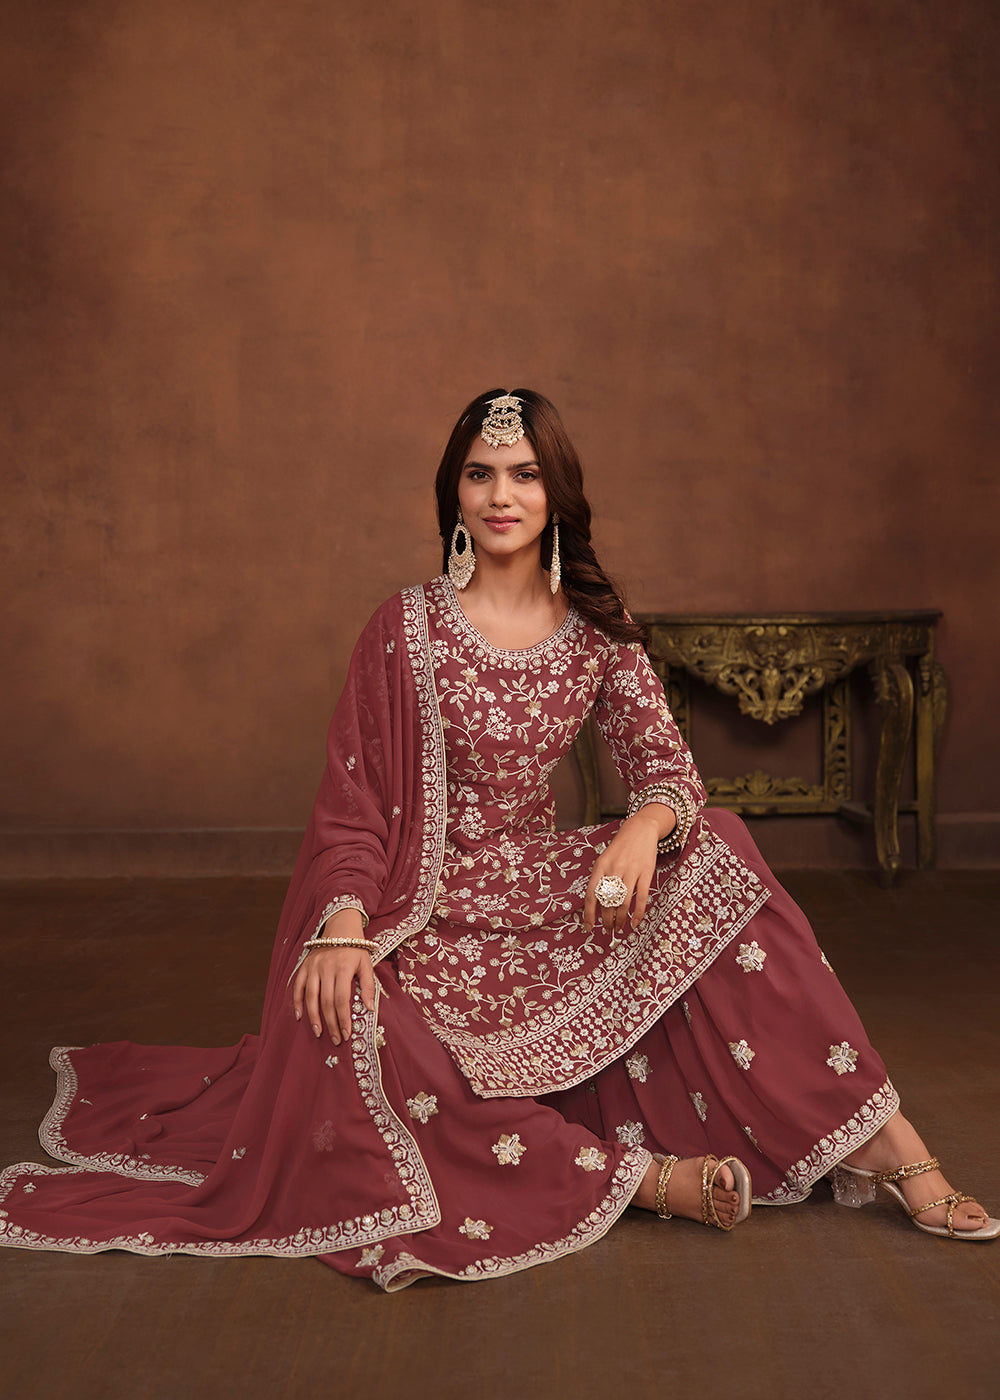 Buy Now Faux Georgette Taupe Mauve Embroidered Festive Salwar Suit Online in USA, UK, Canada, Germany, Australia & Worldwide at Empress Clothing.